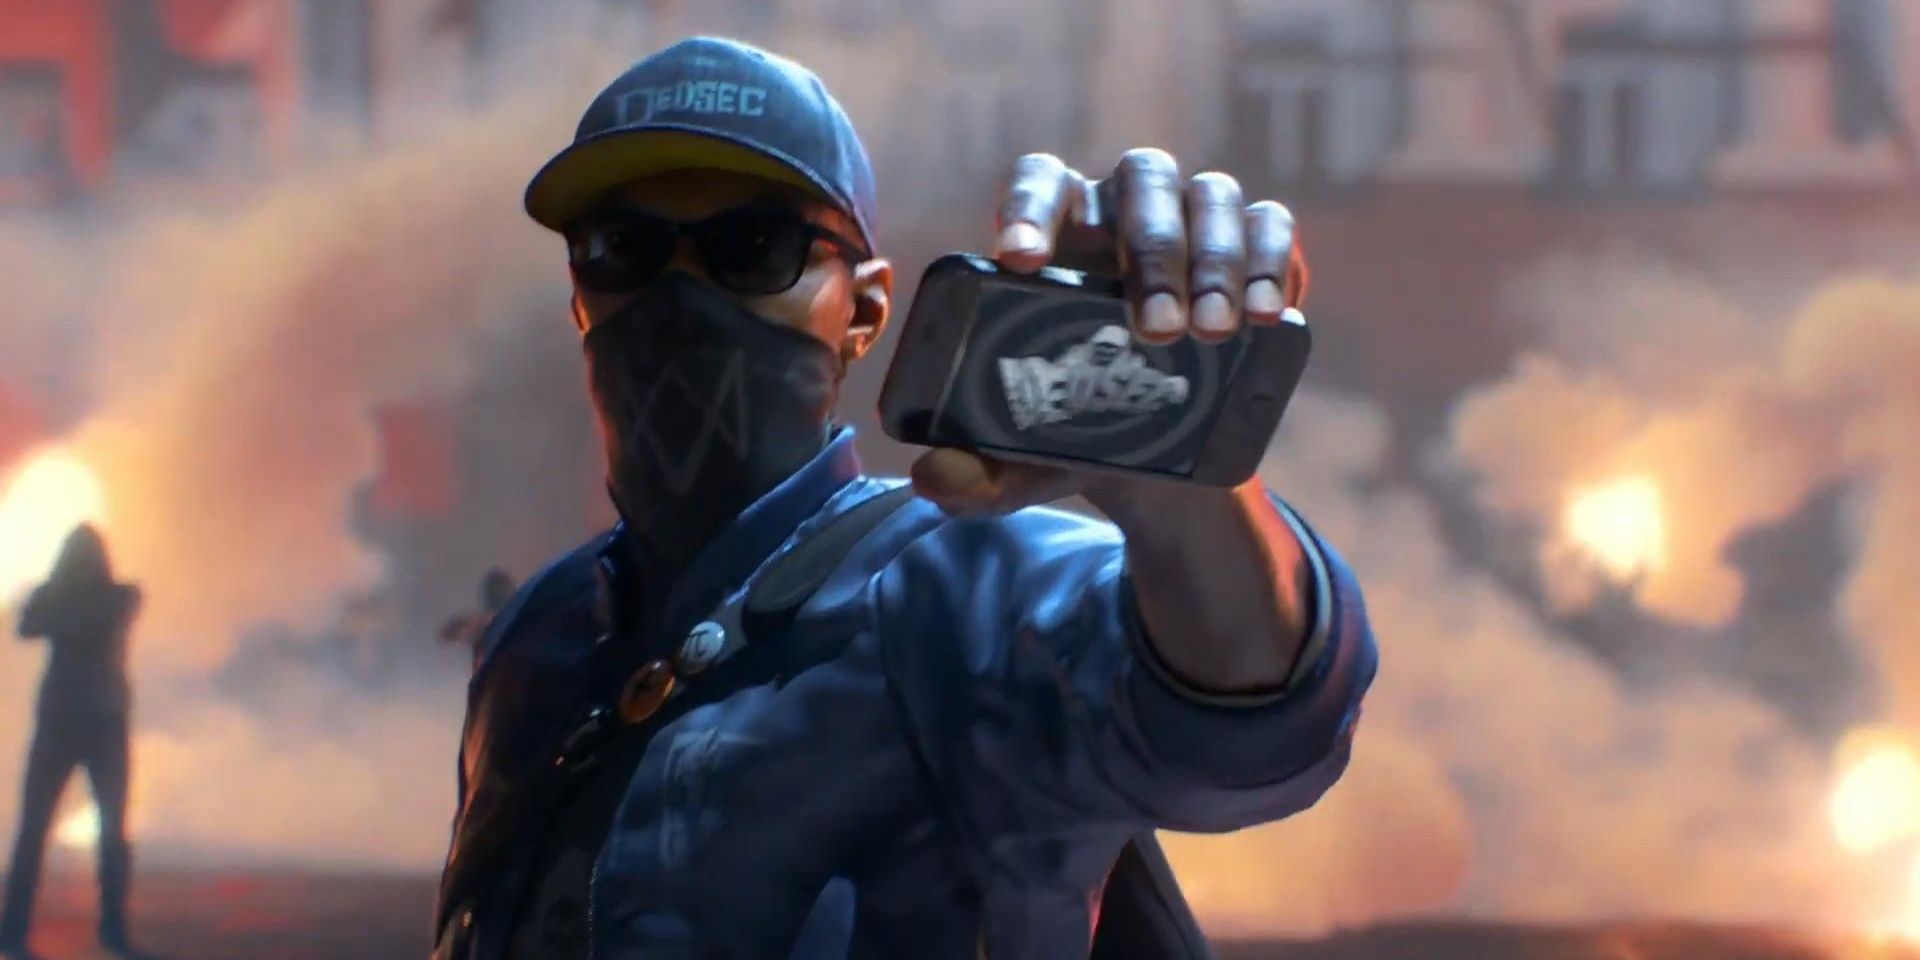 Marcus holds up a smartphone in the Watch Dogs 2 trailer